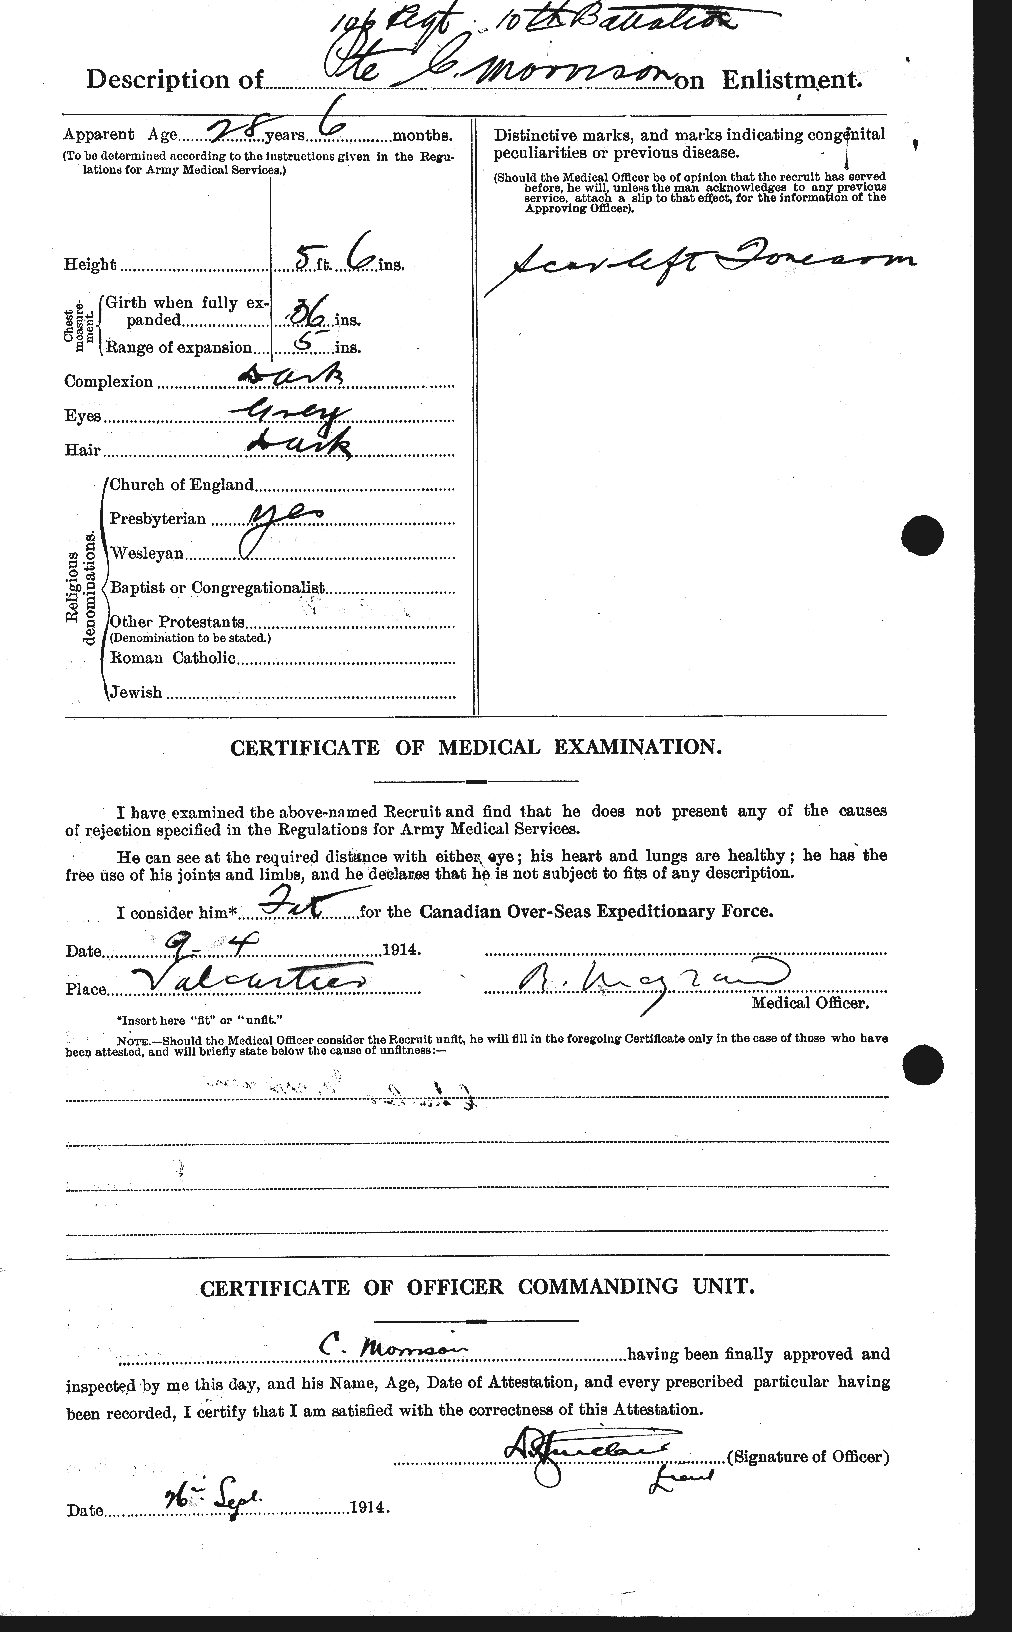 Personnel Records of the First World War - CEF 505349b